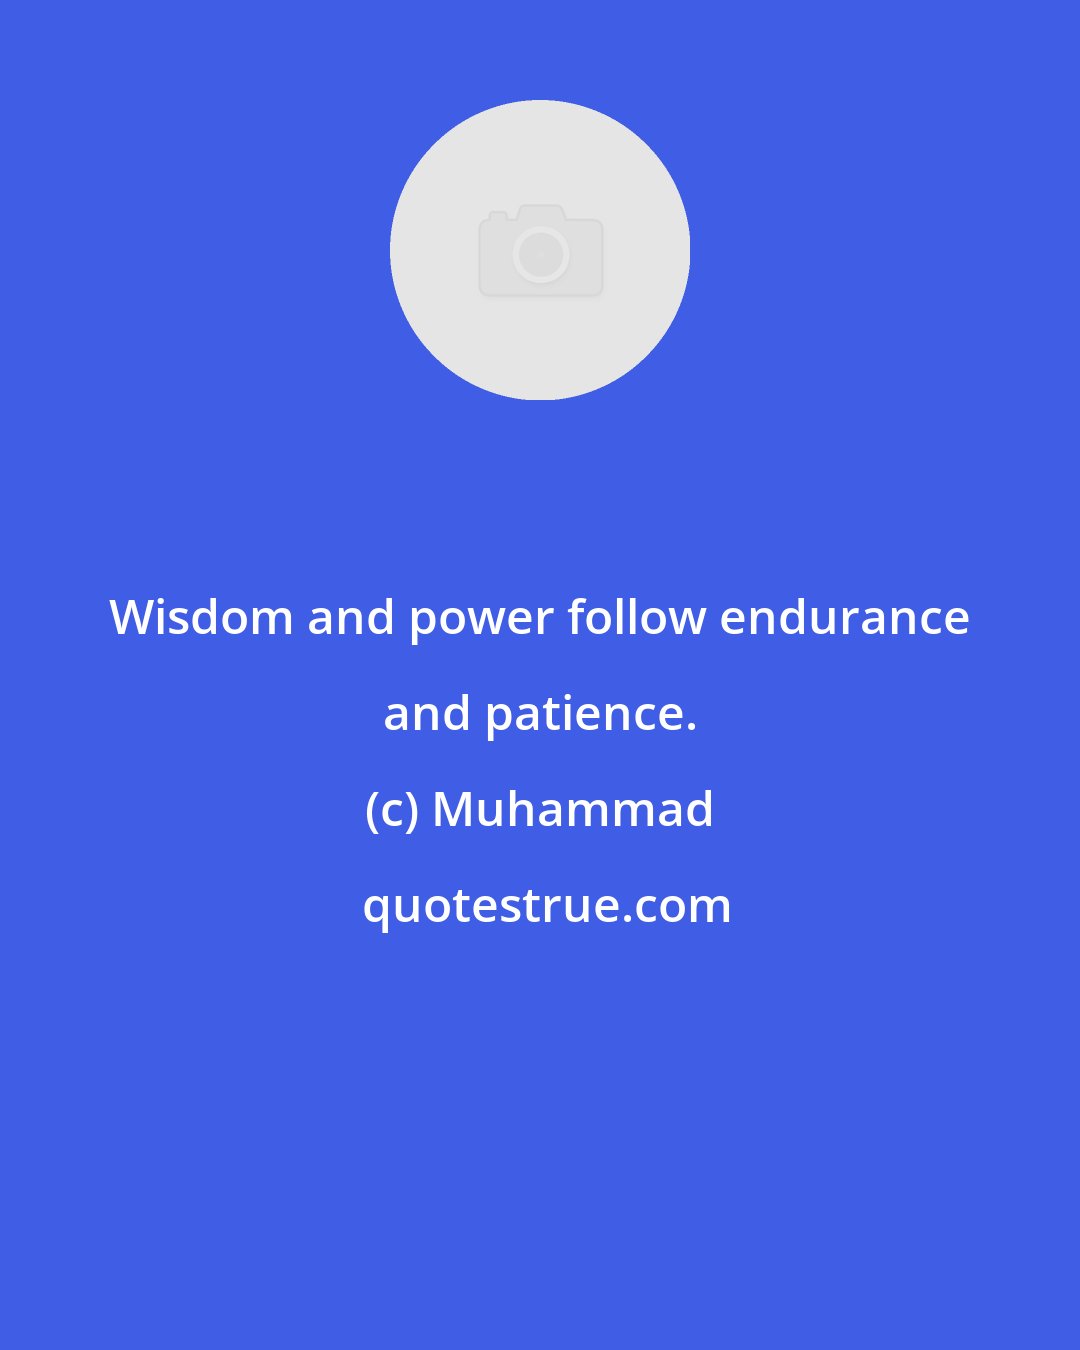 Muhammad: Wisdom and power follow endurance and patience.